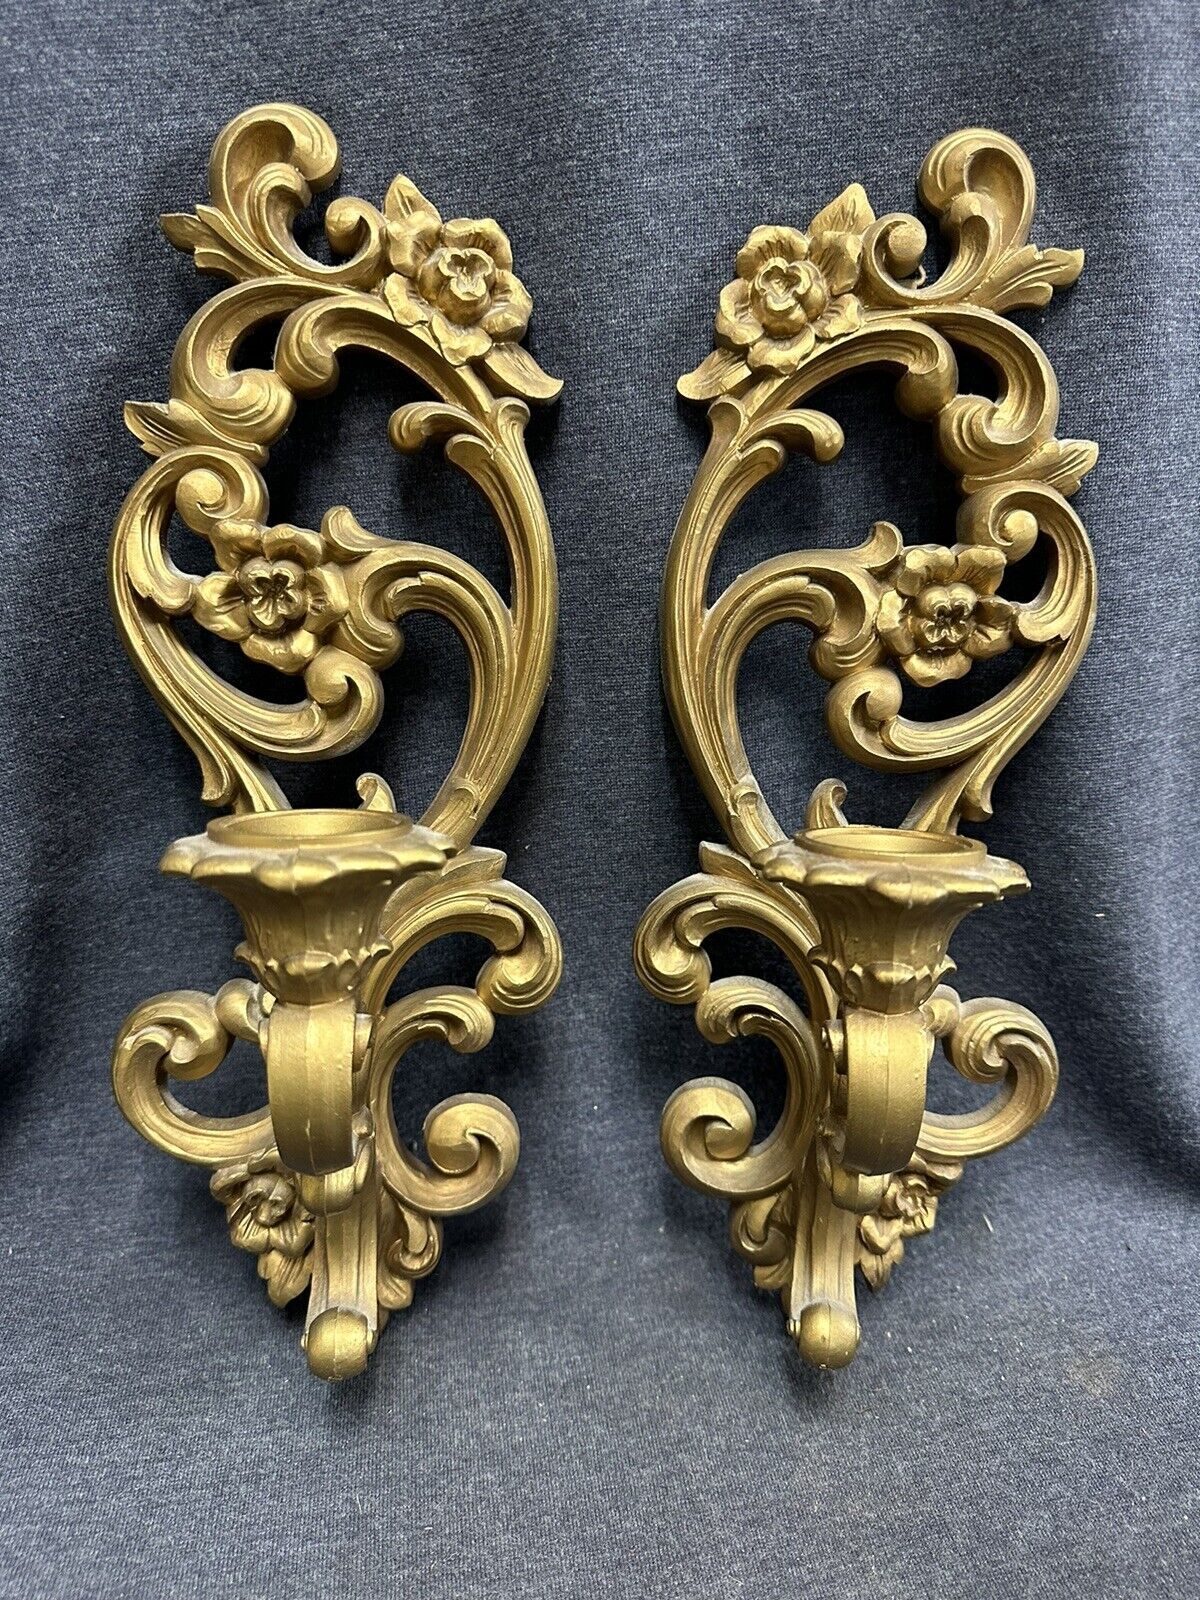 1971 HOMCO Wall Sconces, #4118 - Ready to Hang, Gold Color, 15” - $15.83